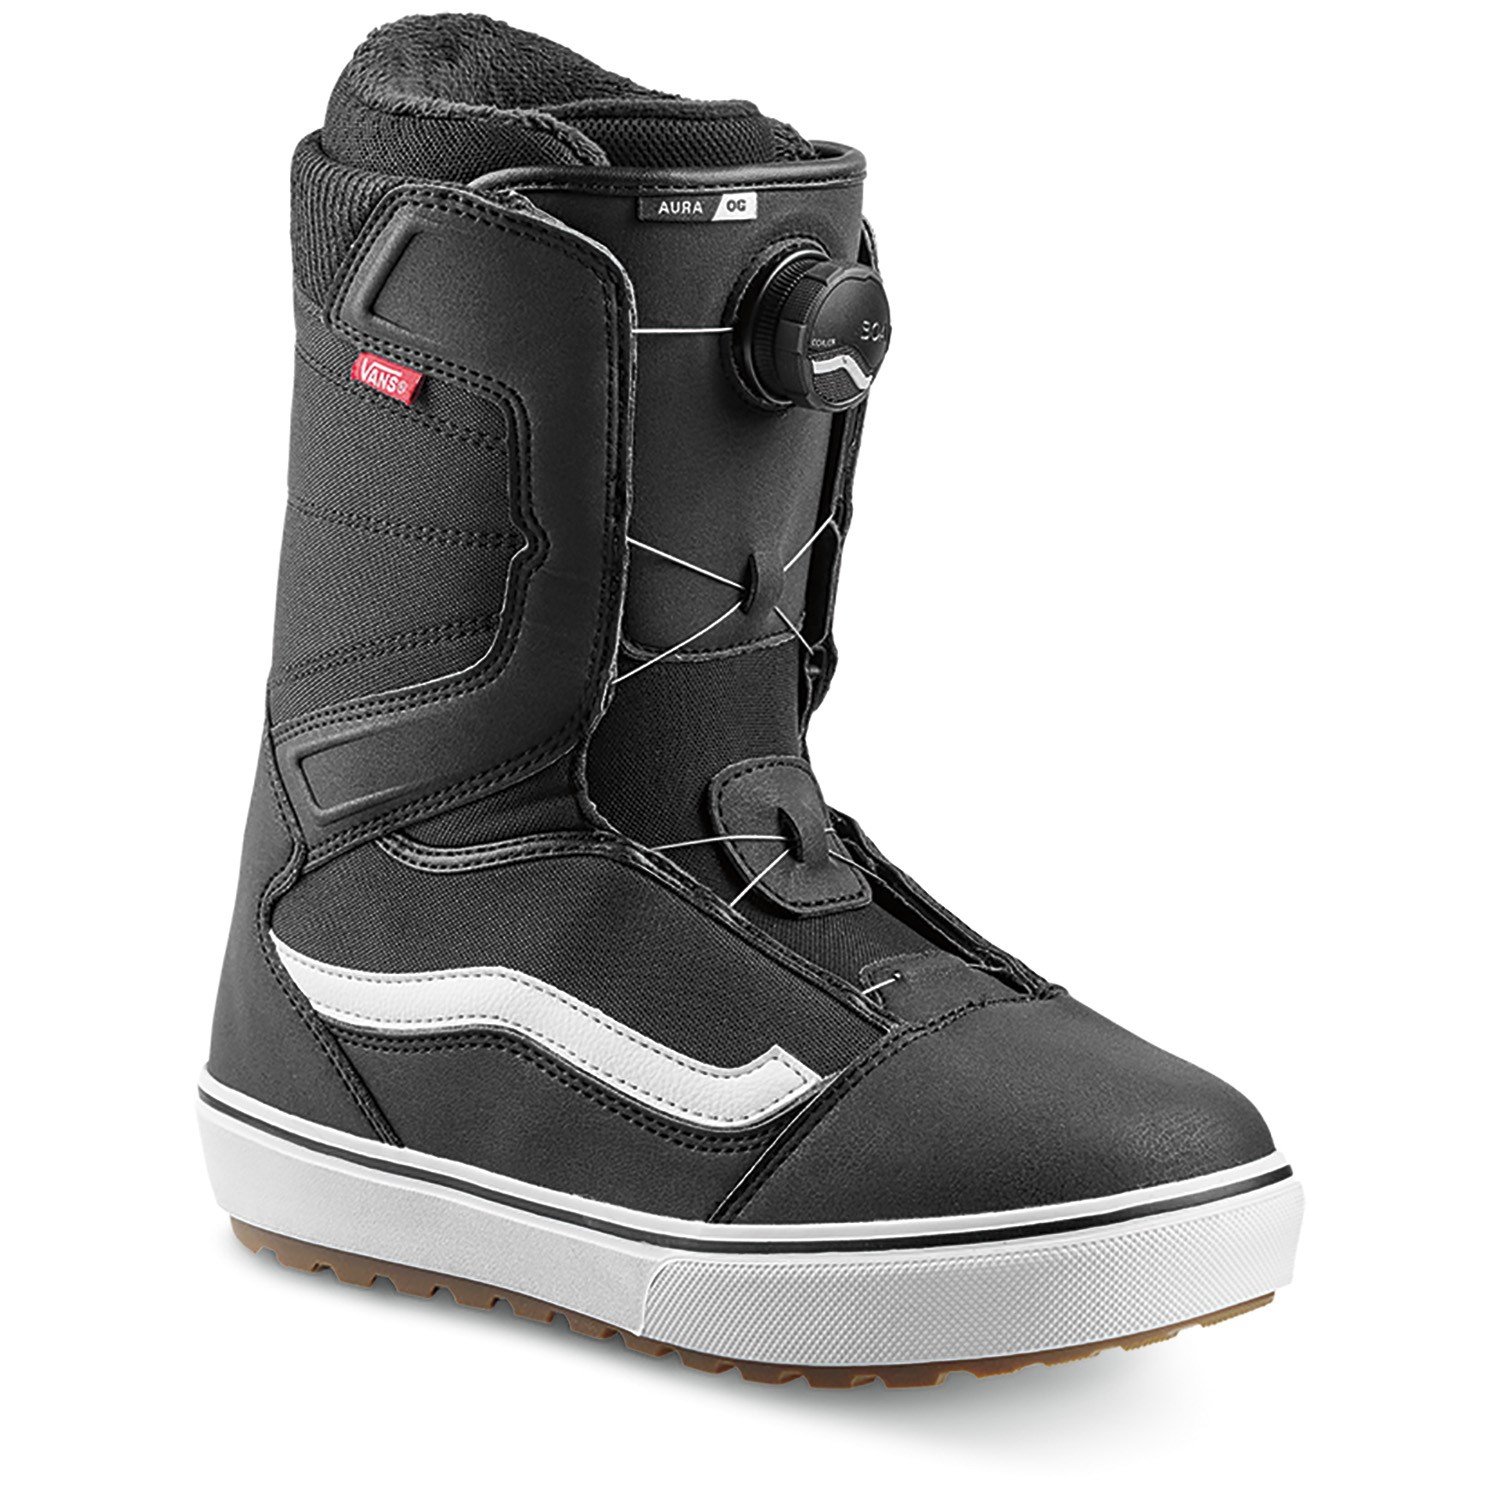 vans snowboard boots used